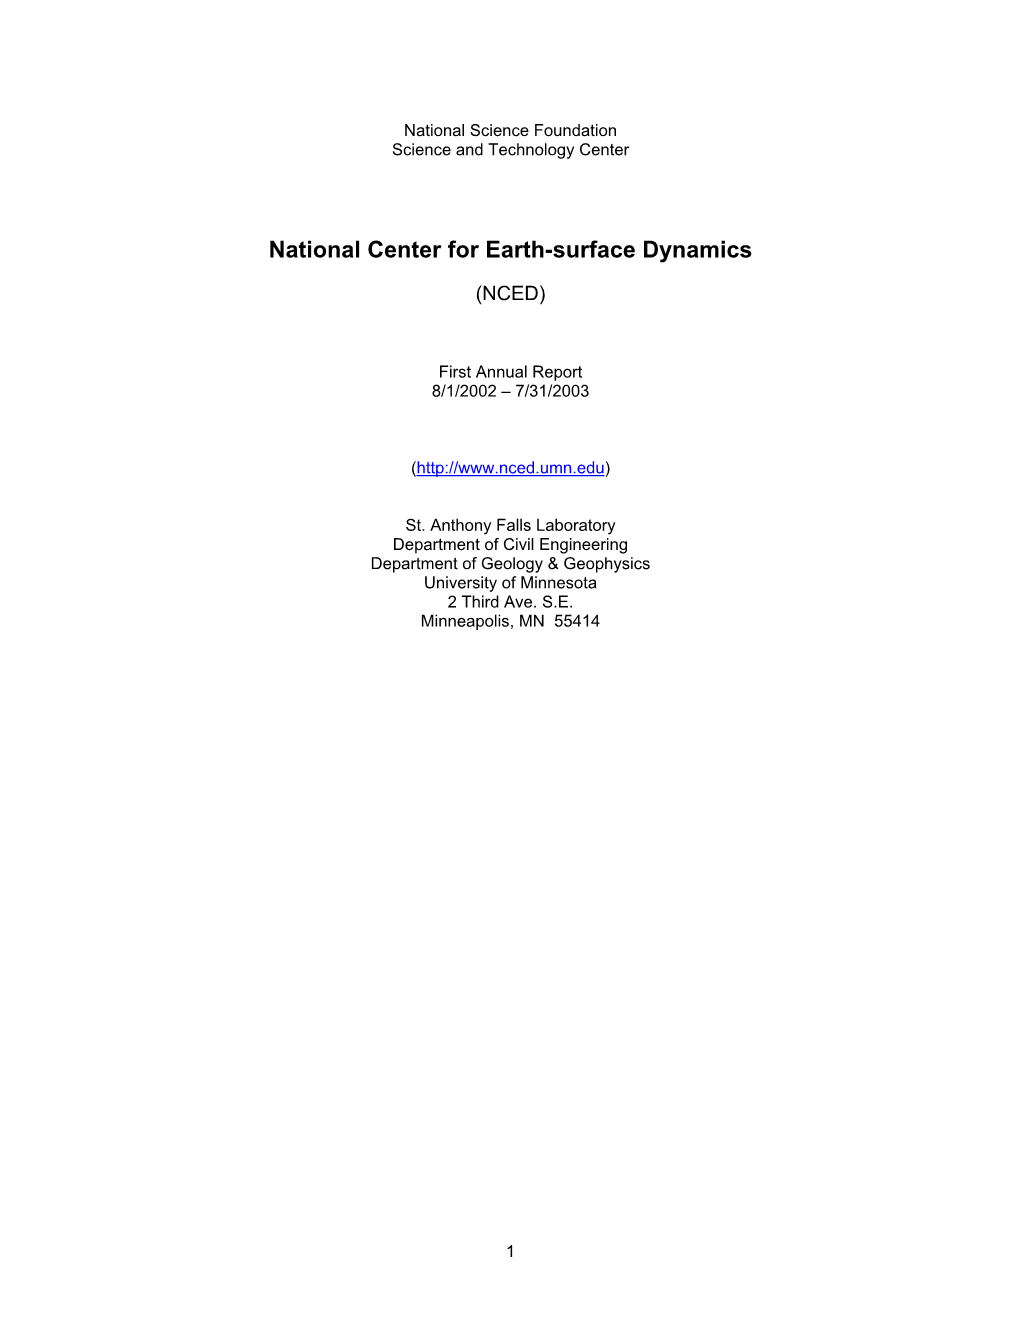 National Center for Earth-Surface Dynamics